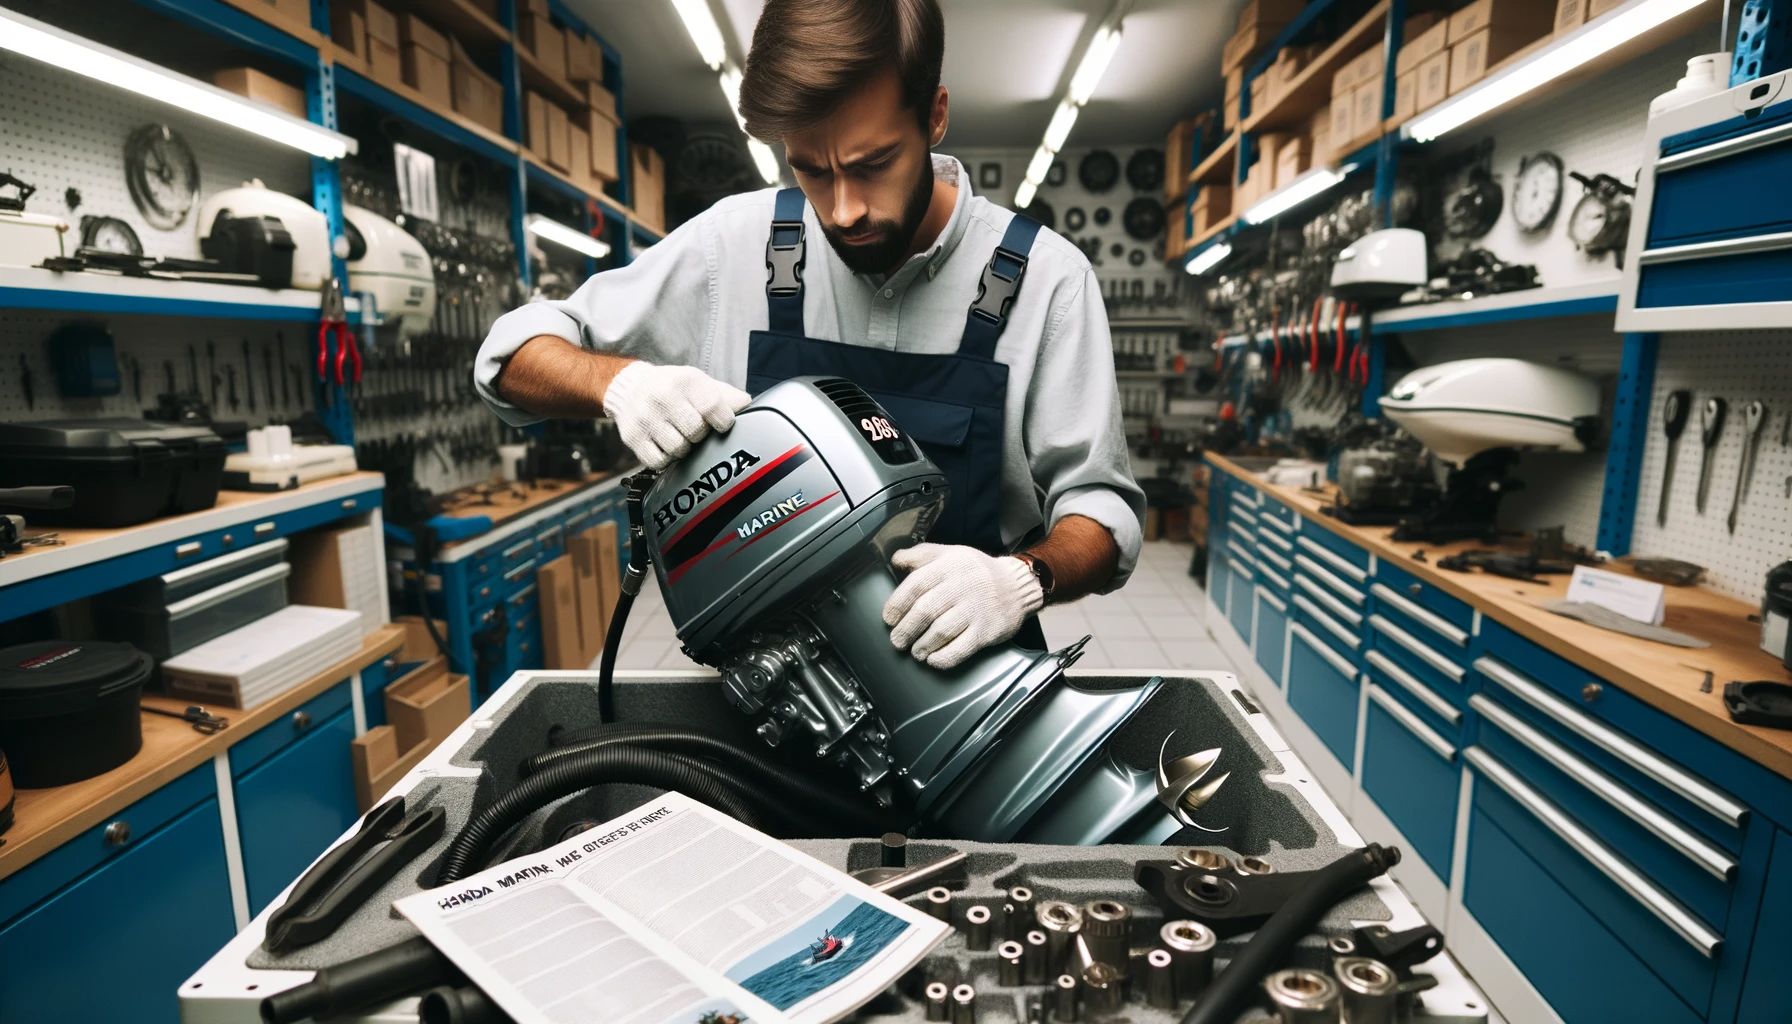 Photo-capturing-a-skilled-marine-engineer-in-the-process-of-servicing-a-Honda-marine-outboard-engine.-The-environment-suggests-a-professional-marine